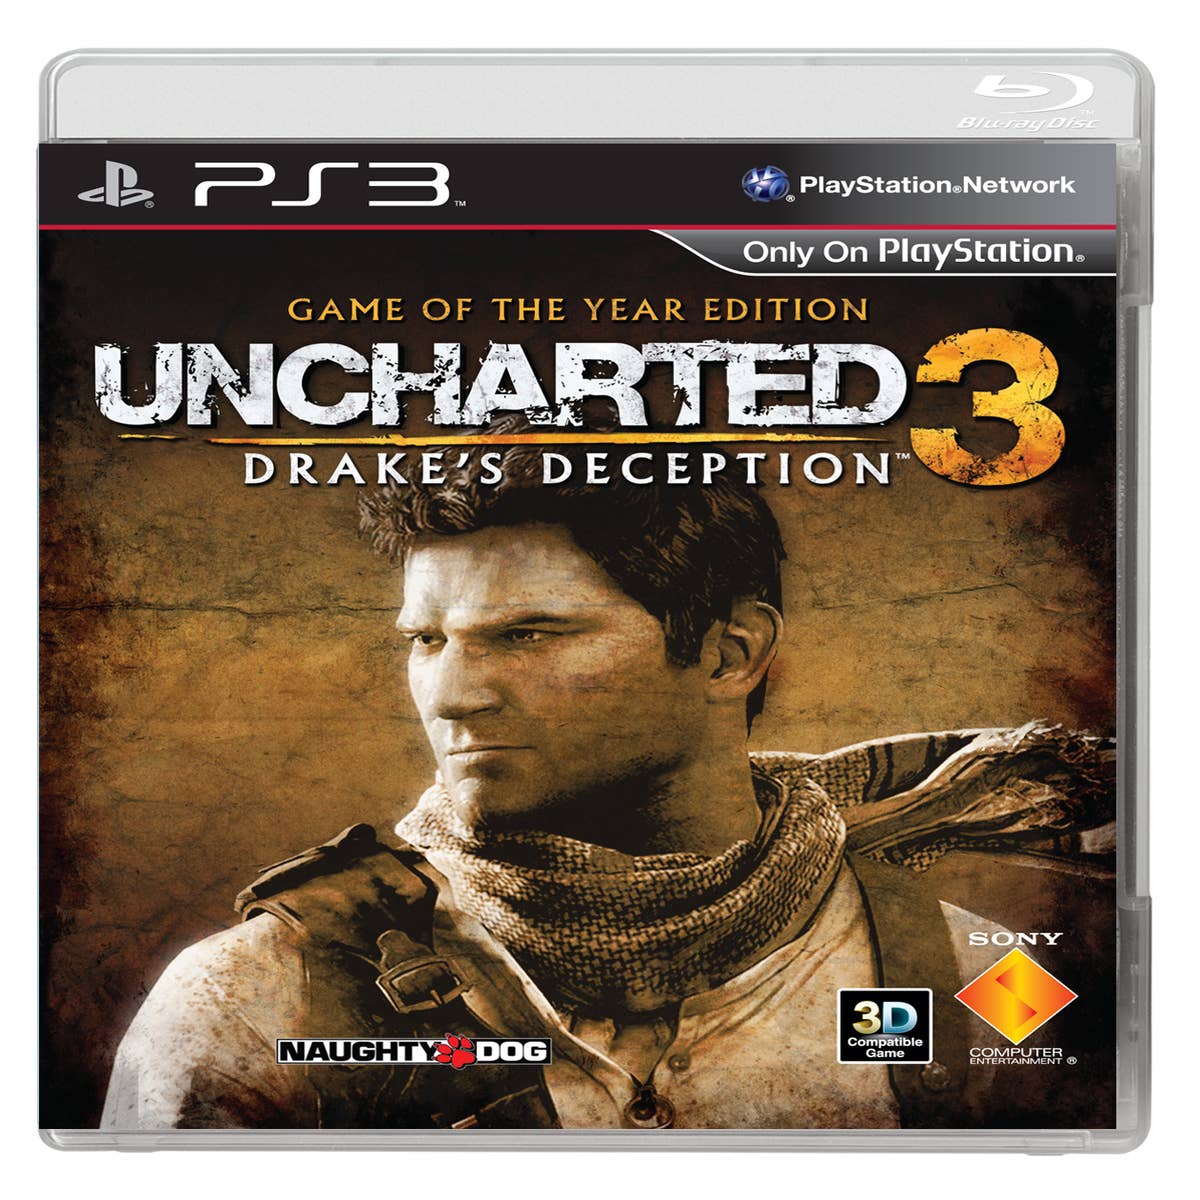 LET'S PLAY: UNCHARTED 3